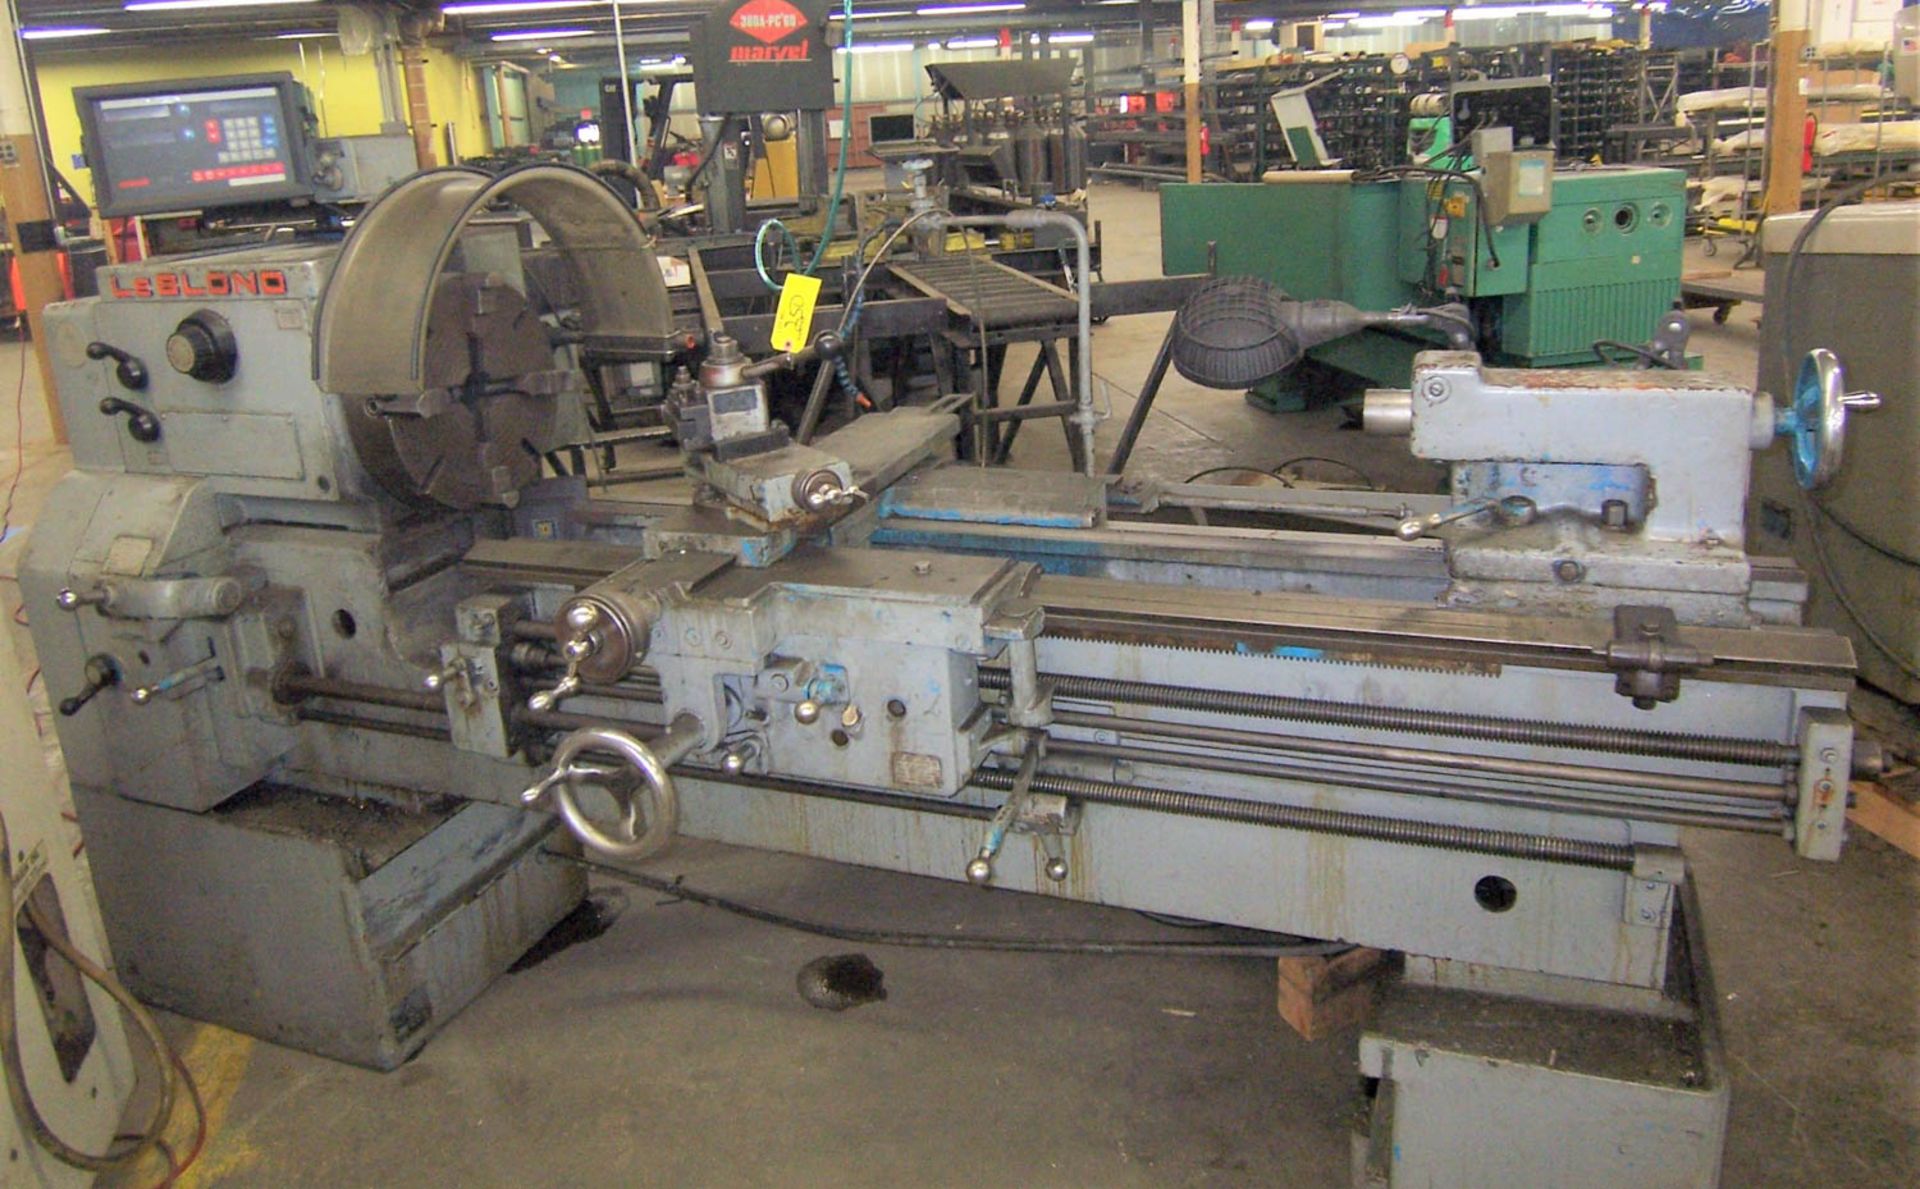 19"/35" X 60"/85" (APPROXIMATELY) LEBLOND REGAL SLIDING GAP BED LATHE, WITH NEWALL DP-7 DIGITAL